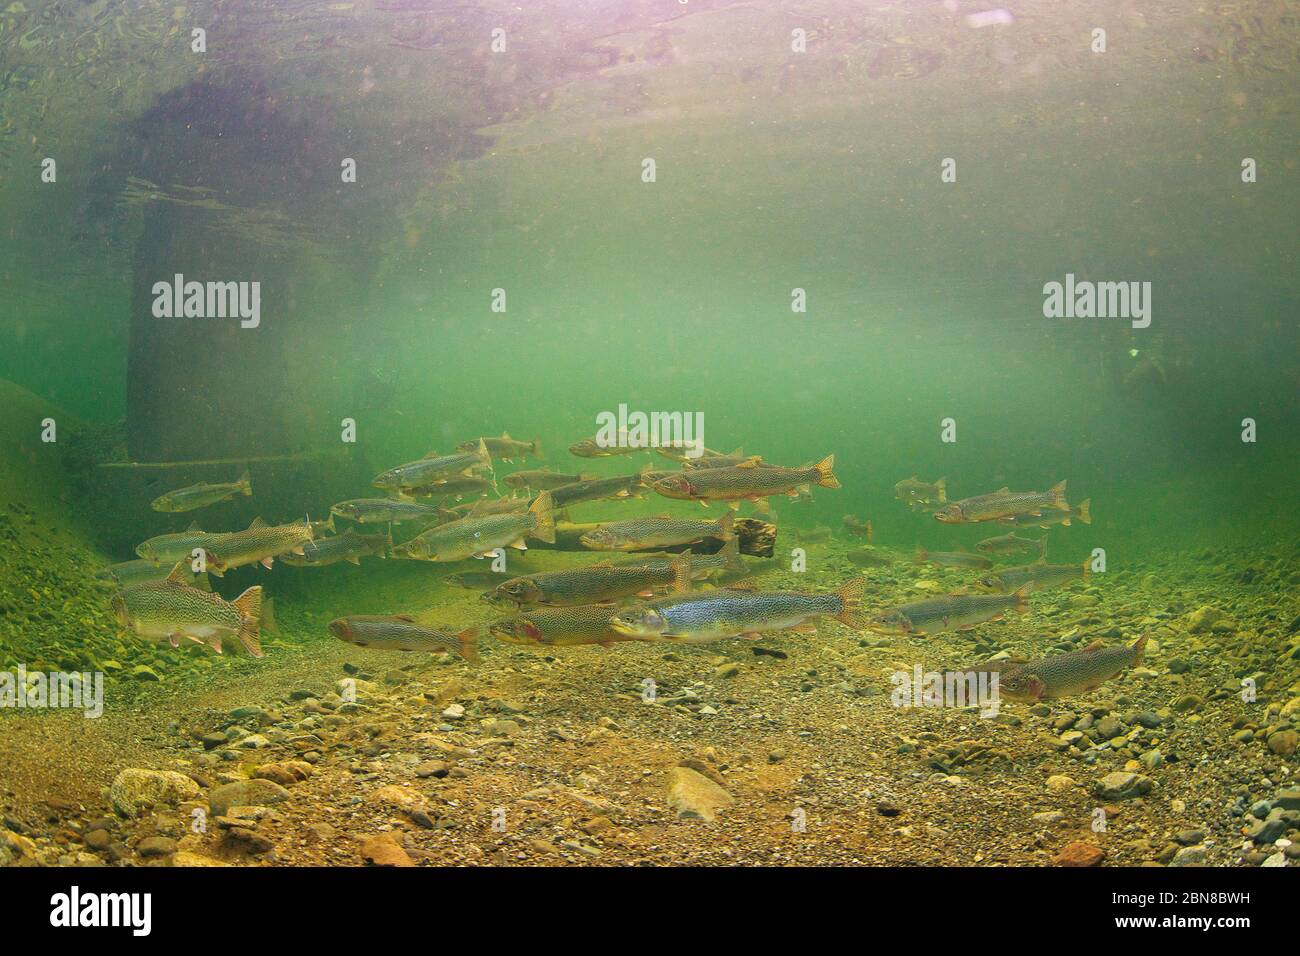 School of  adult Cutthroat Trout in Cowichan Valley. Stock Photo